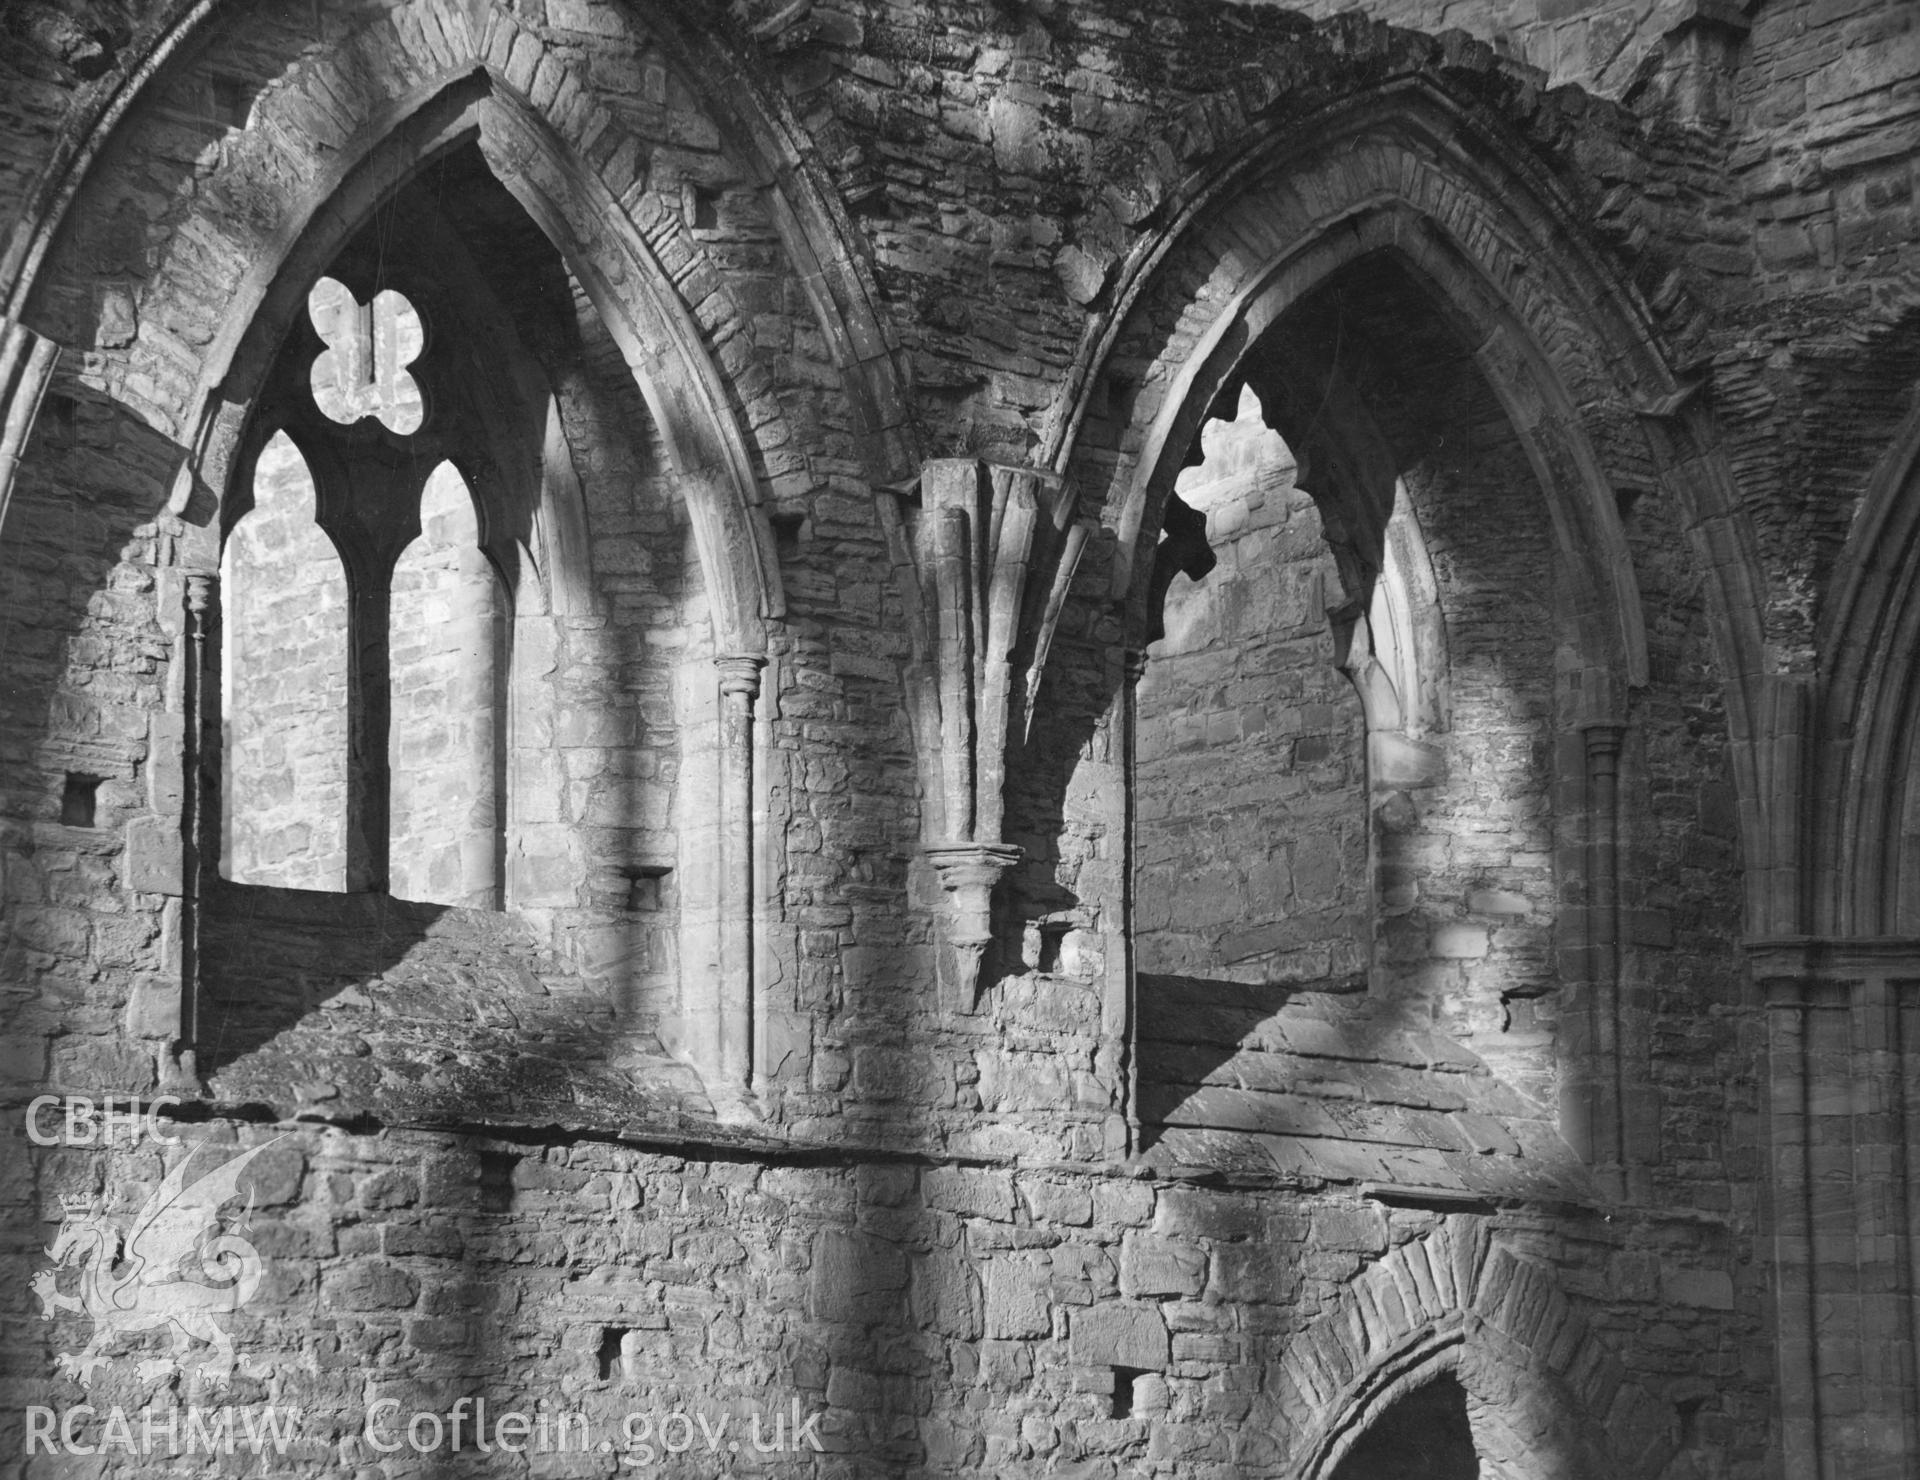 Digital copy of an interior view of Tintern Abbey showing east windows in the nave taken by Shirley Jones. dated 1943.